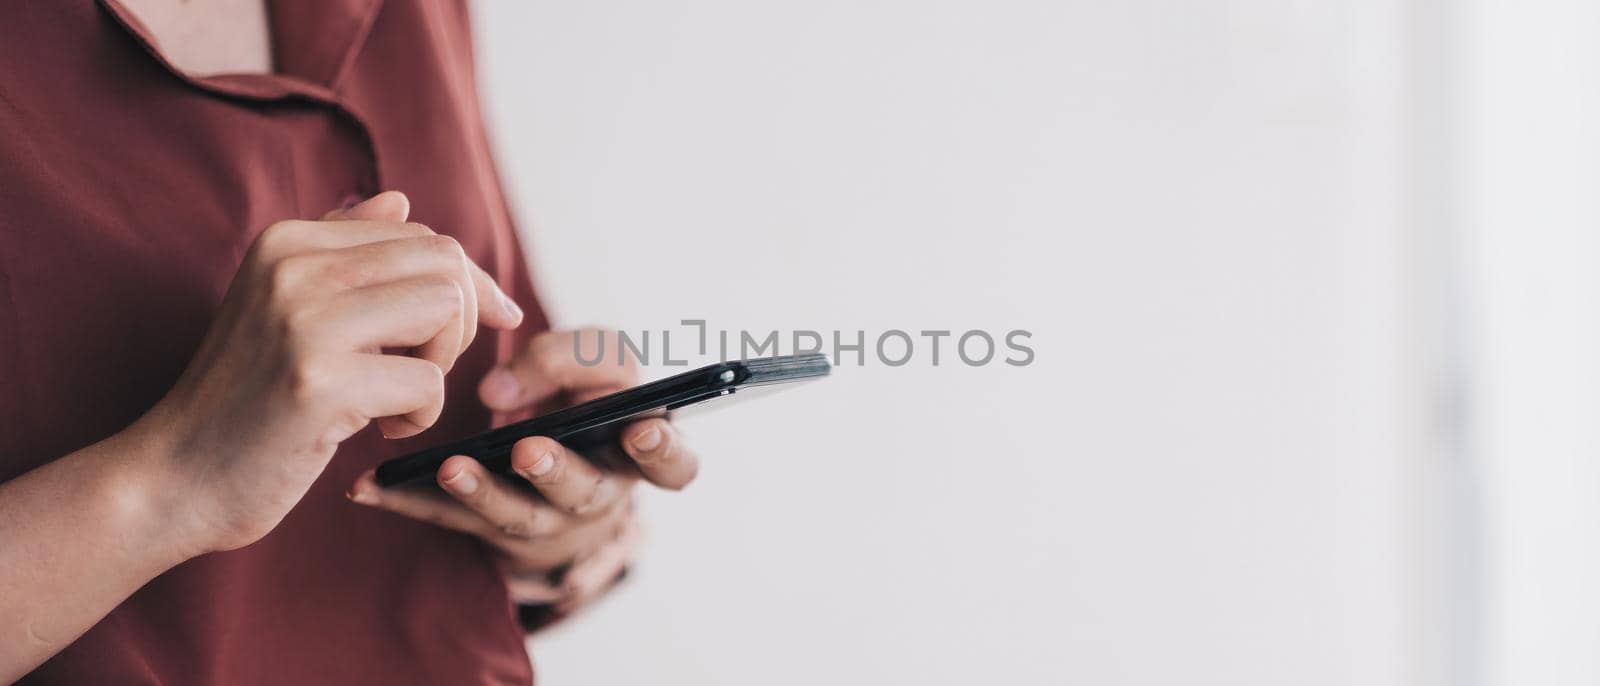 Women's hands use a smartphone for online shopping, social networking, or remote work. Close up image.